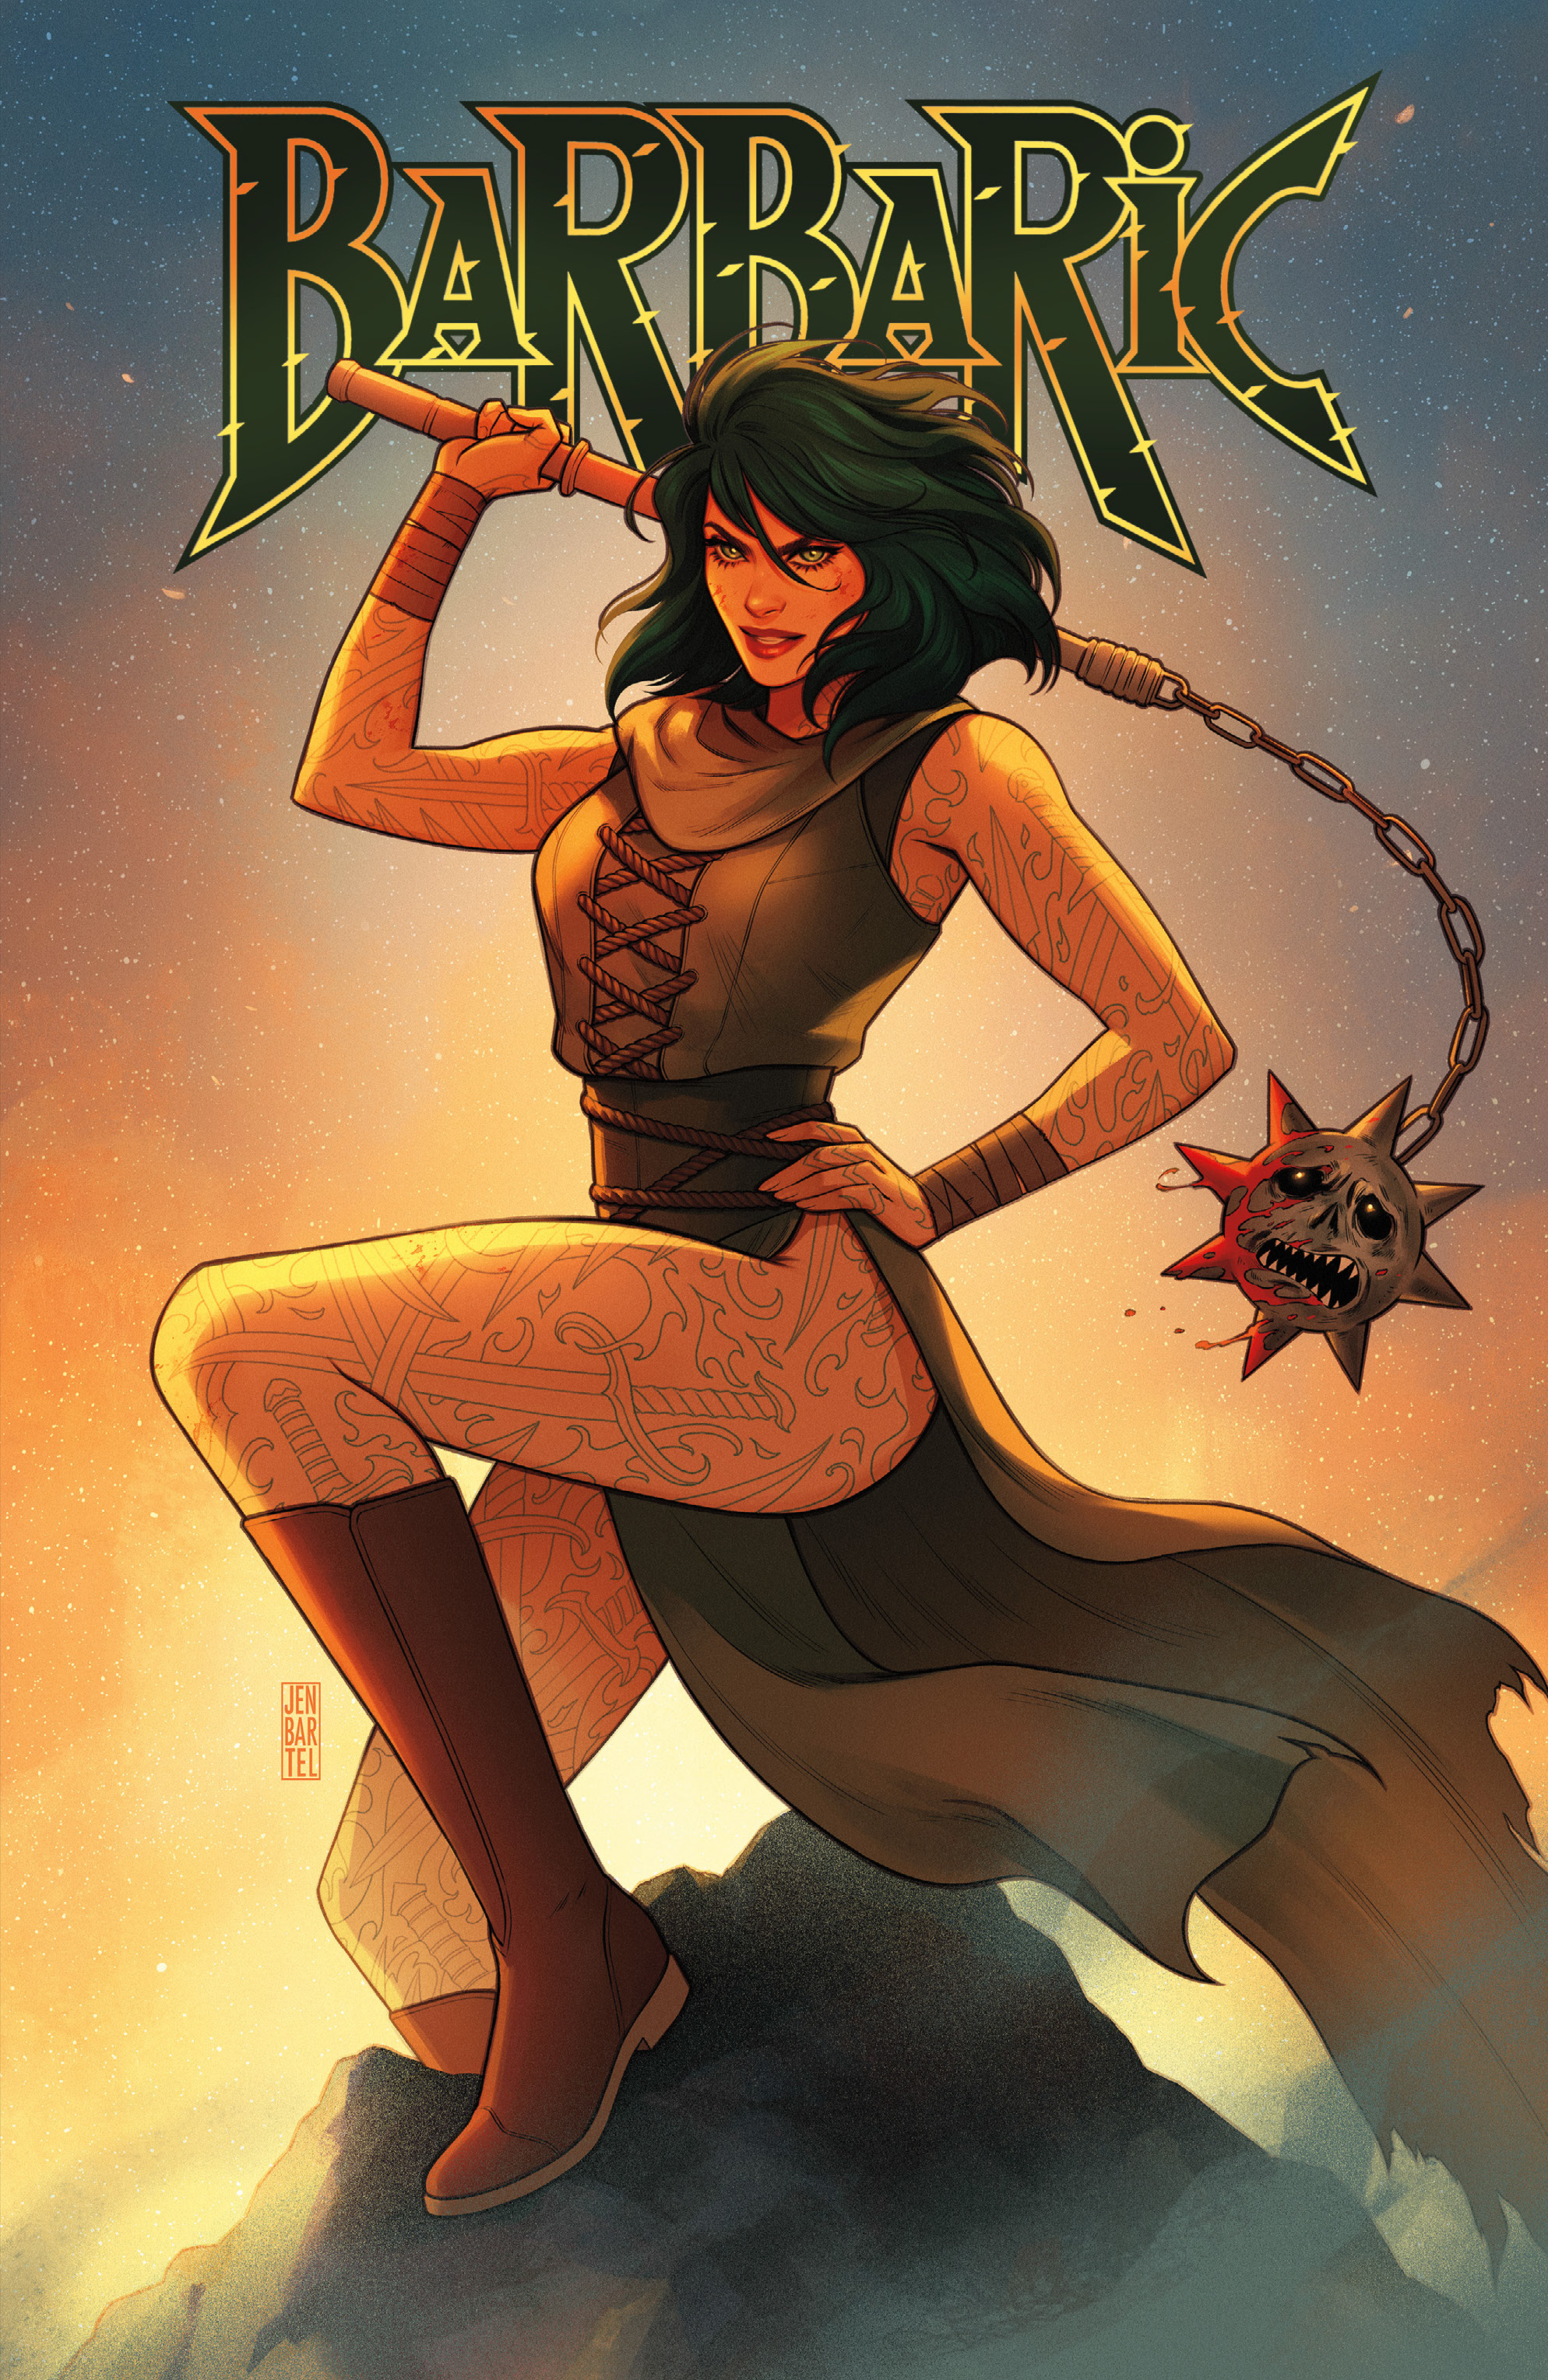 Barbaric Wrong Kind of Righteous #1 Cover C Jen Bartel 1 for 10 Incentive Cover